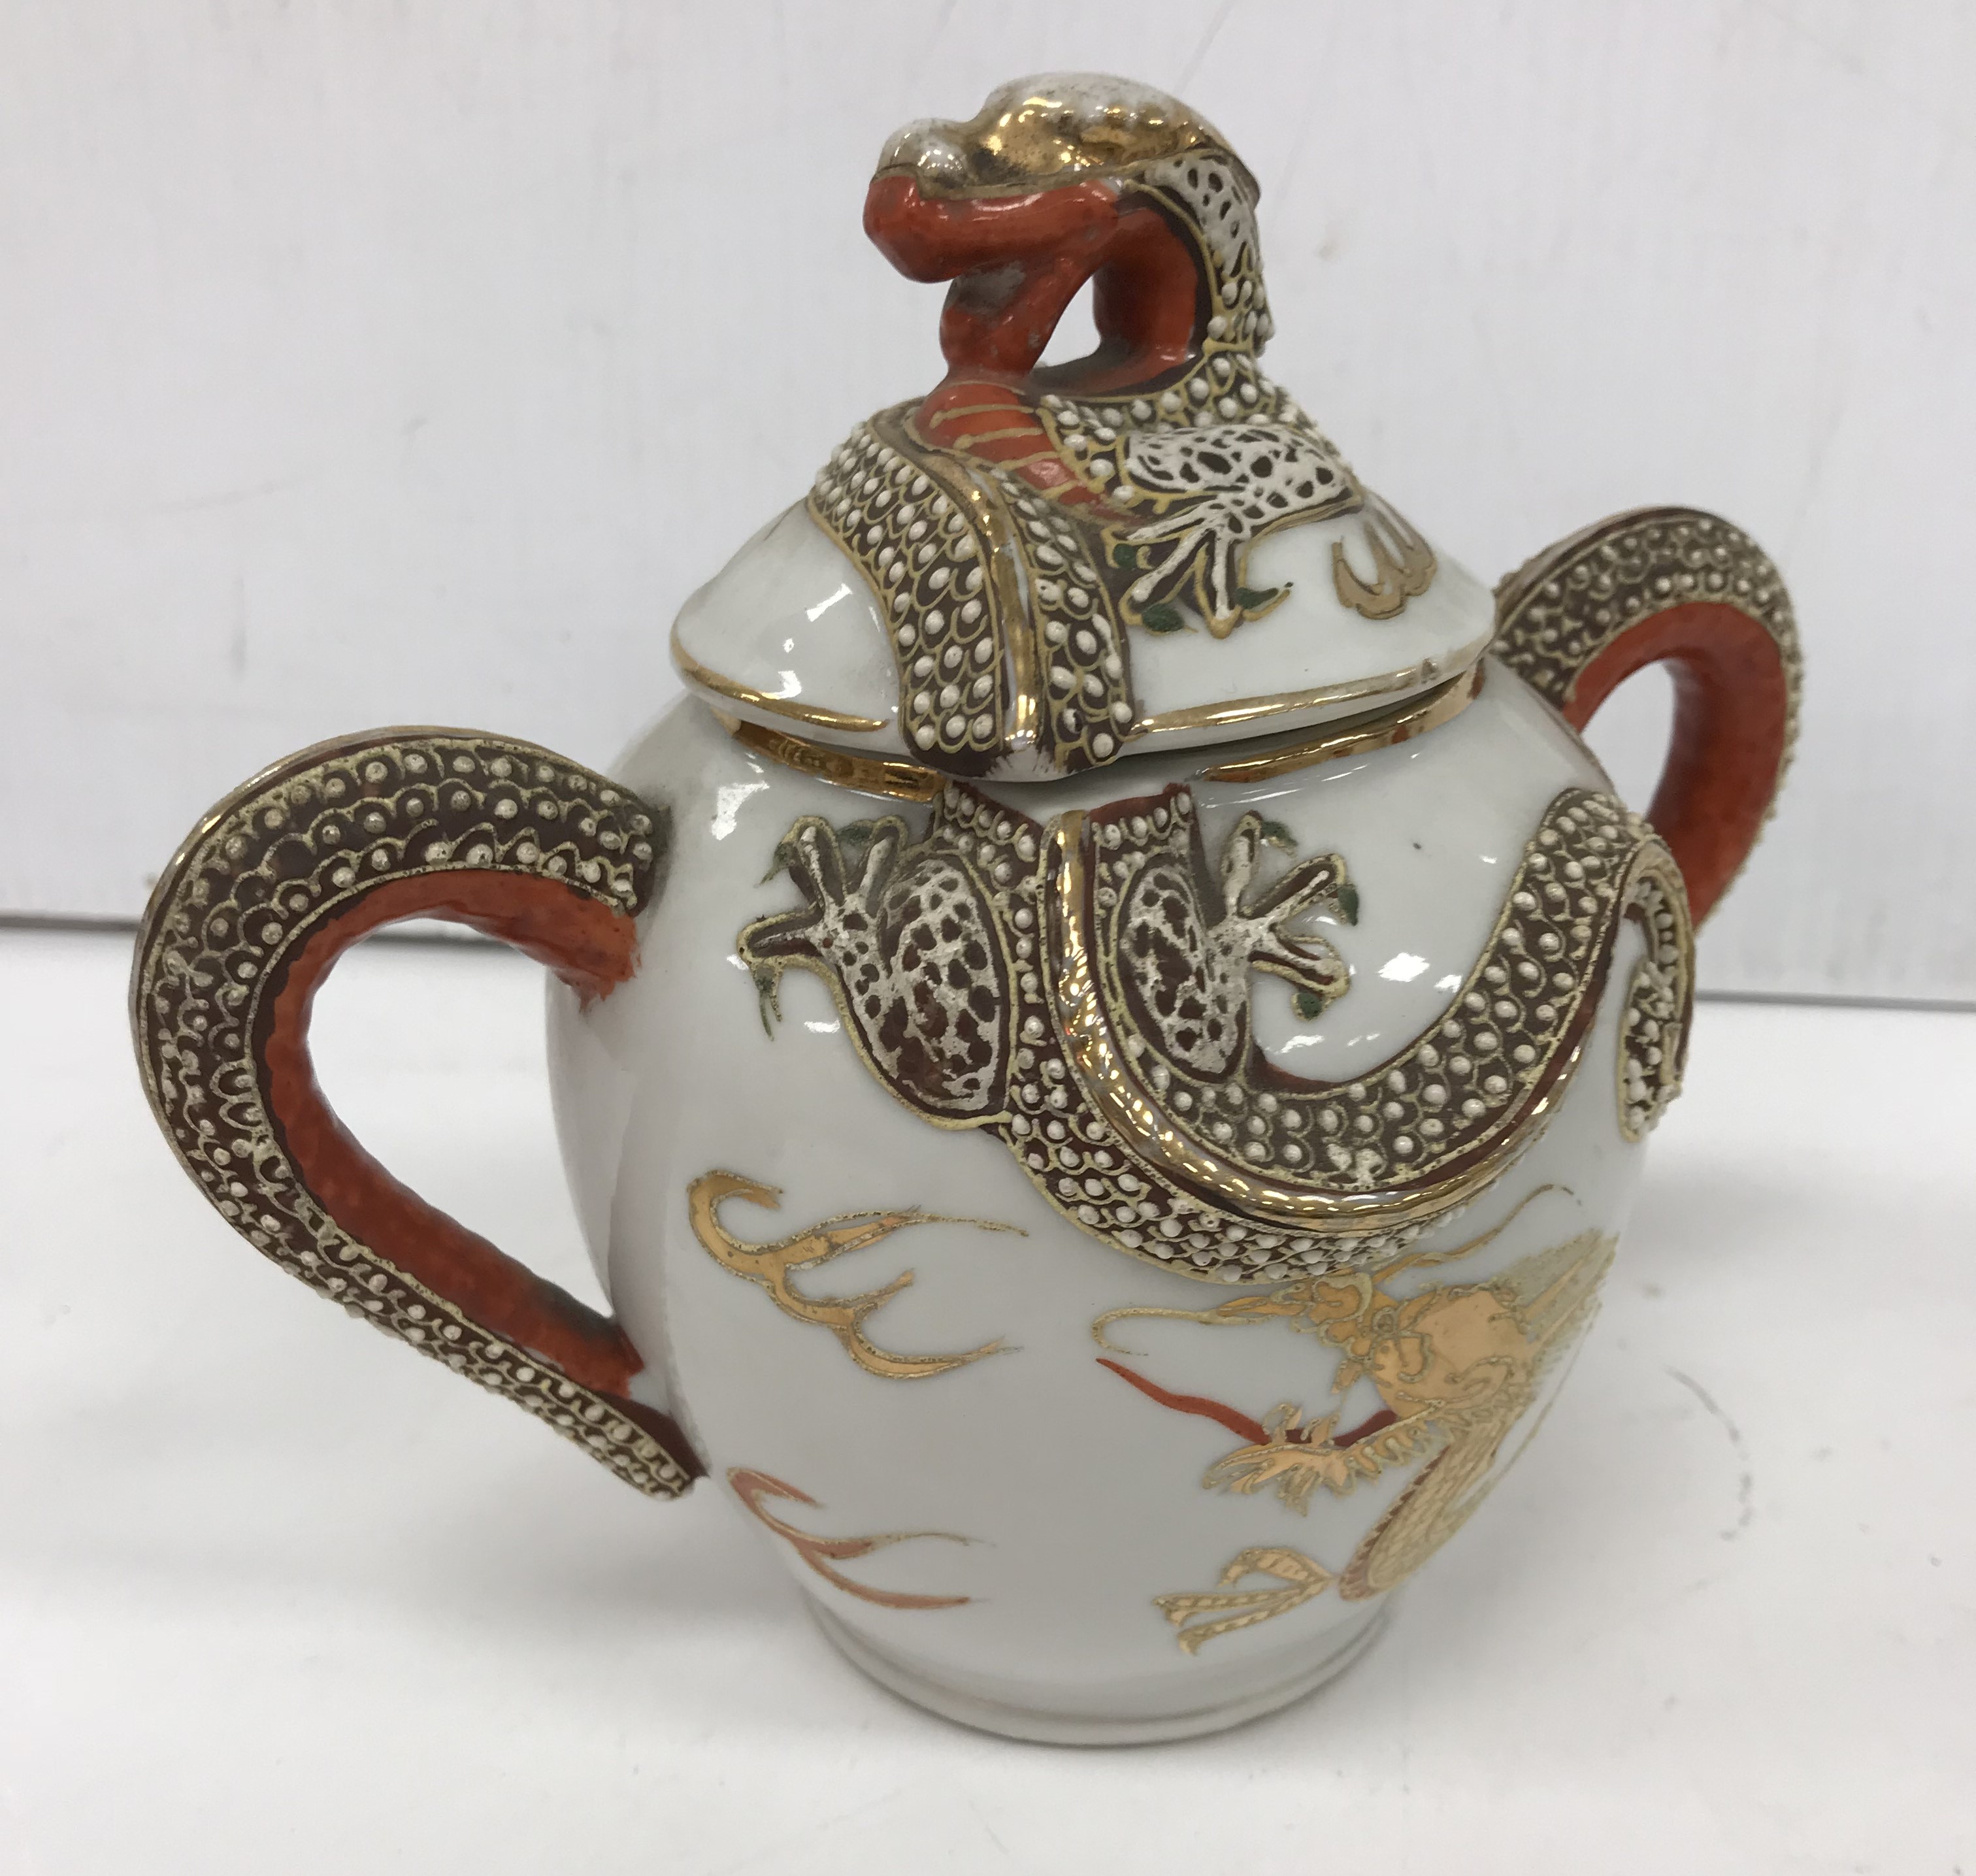 A collection of various Japanese and Chinese pottery and porcelain including a Japanese dragon - Image 6 of 10